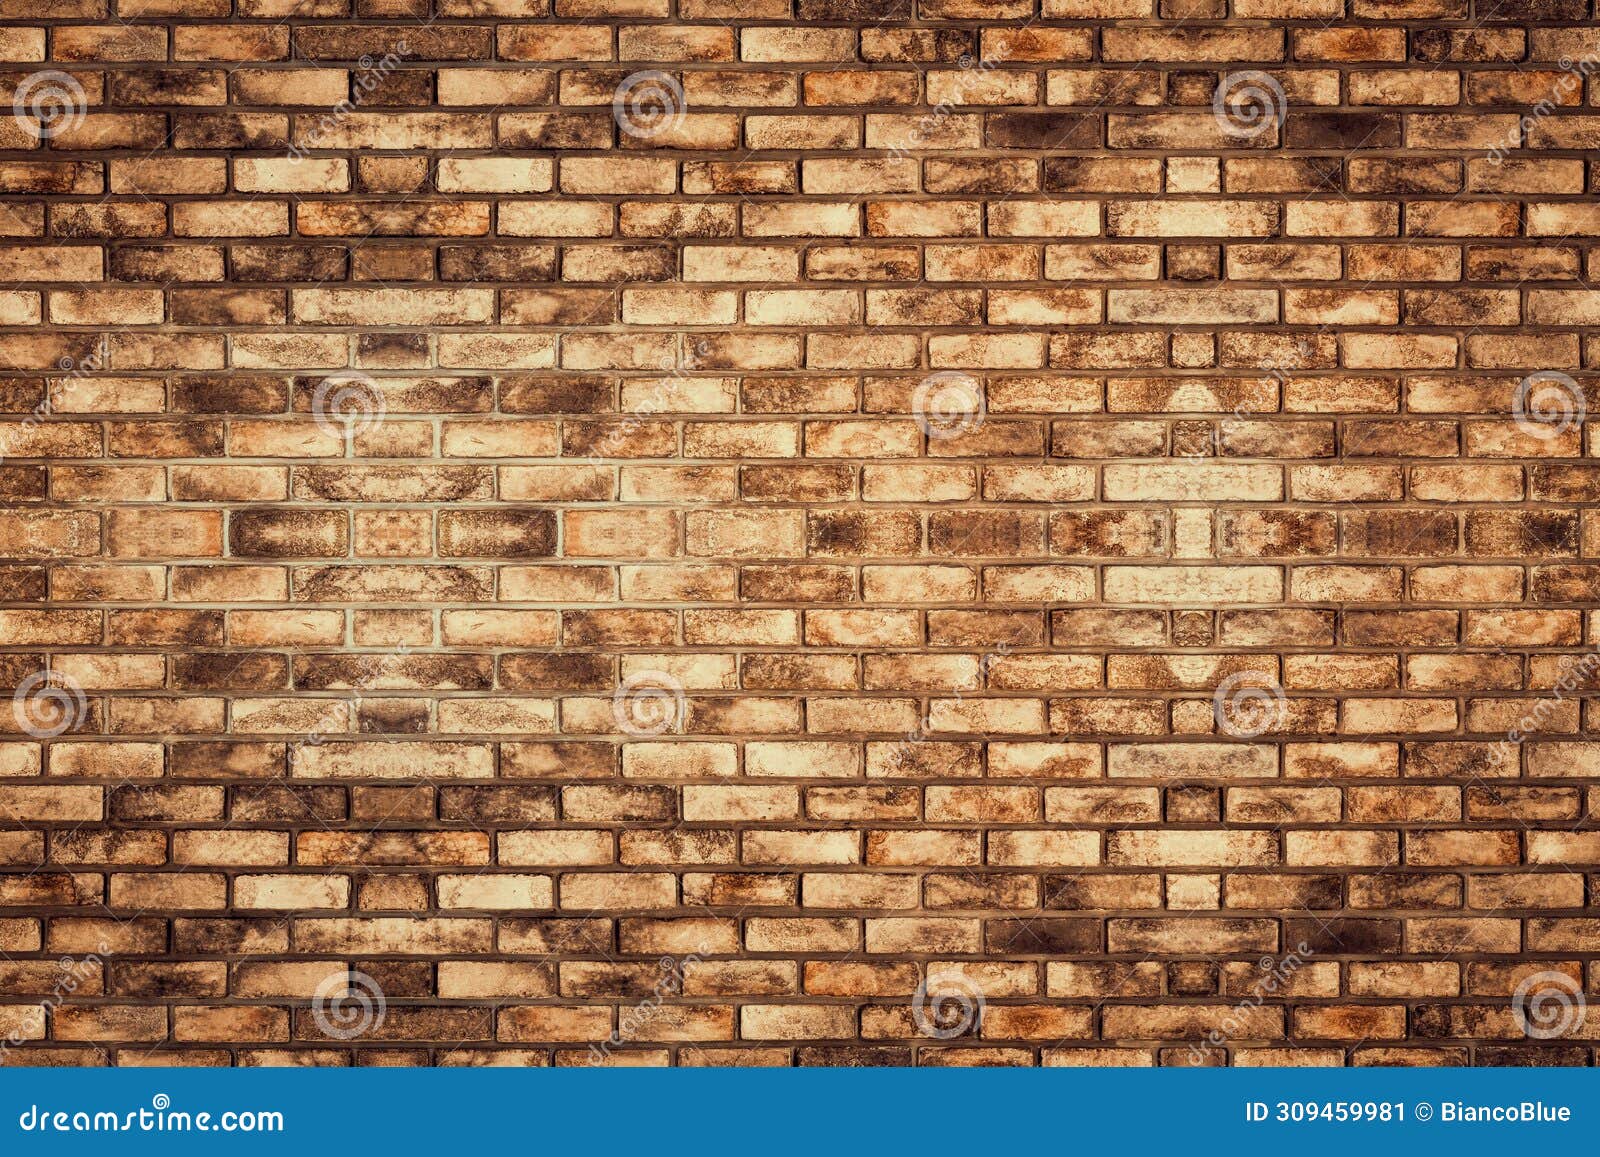 background of brick wall with old texture pattern. uds